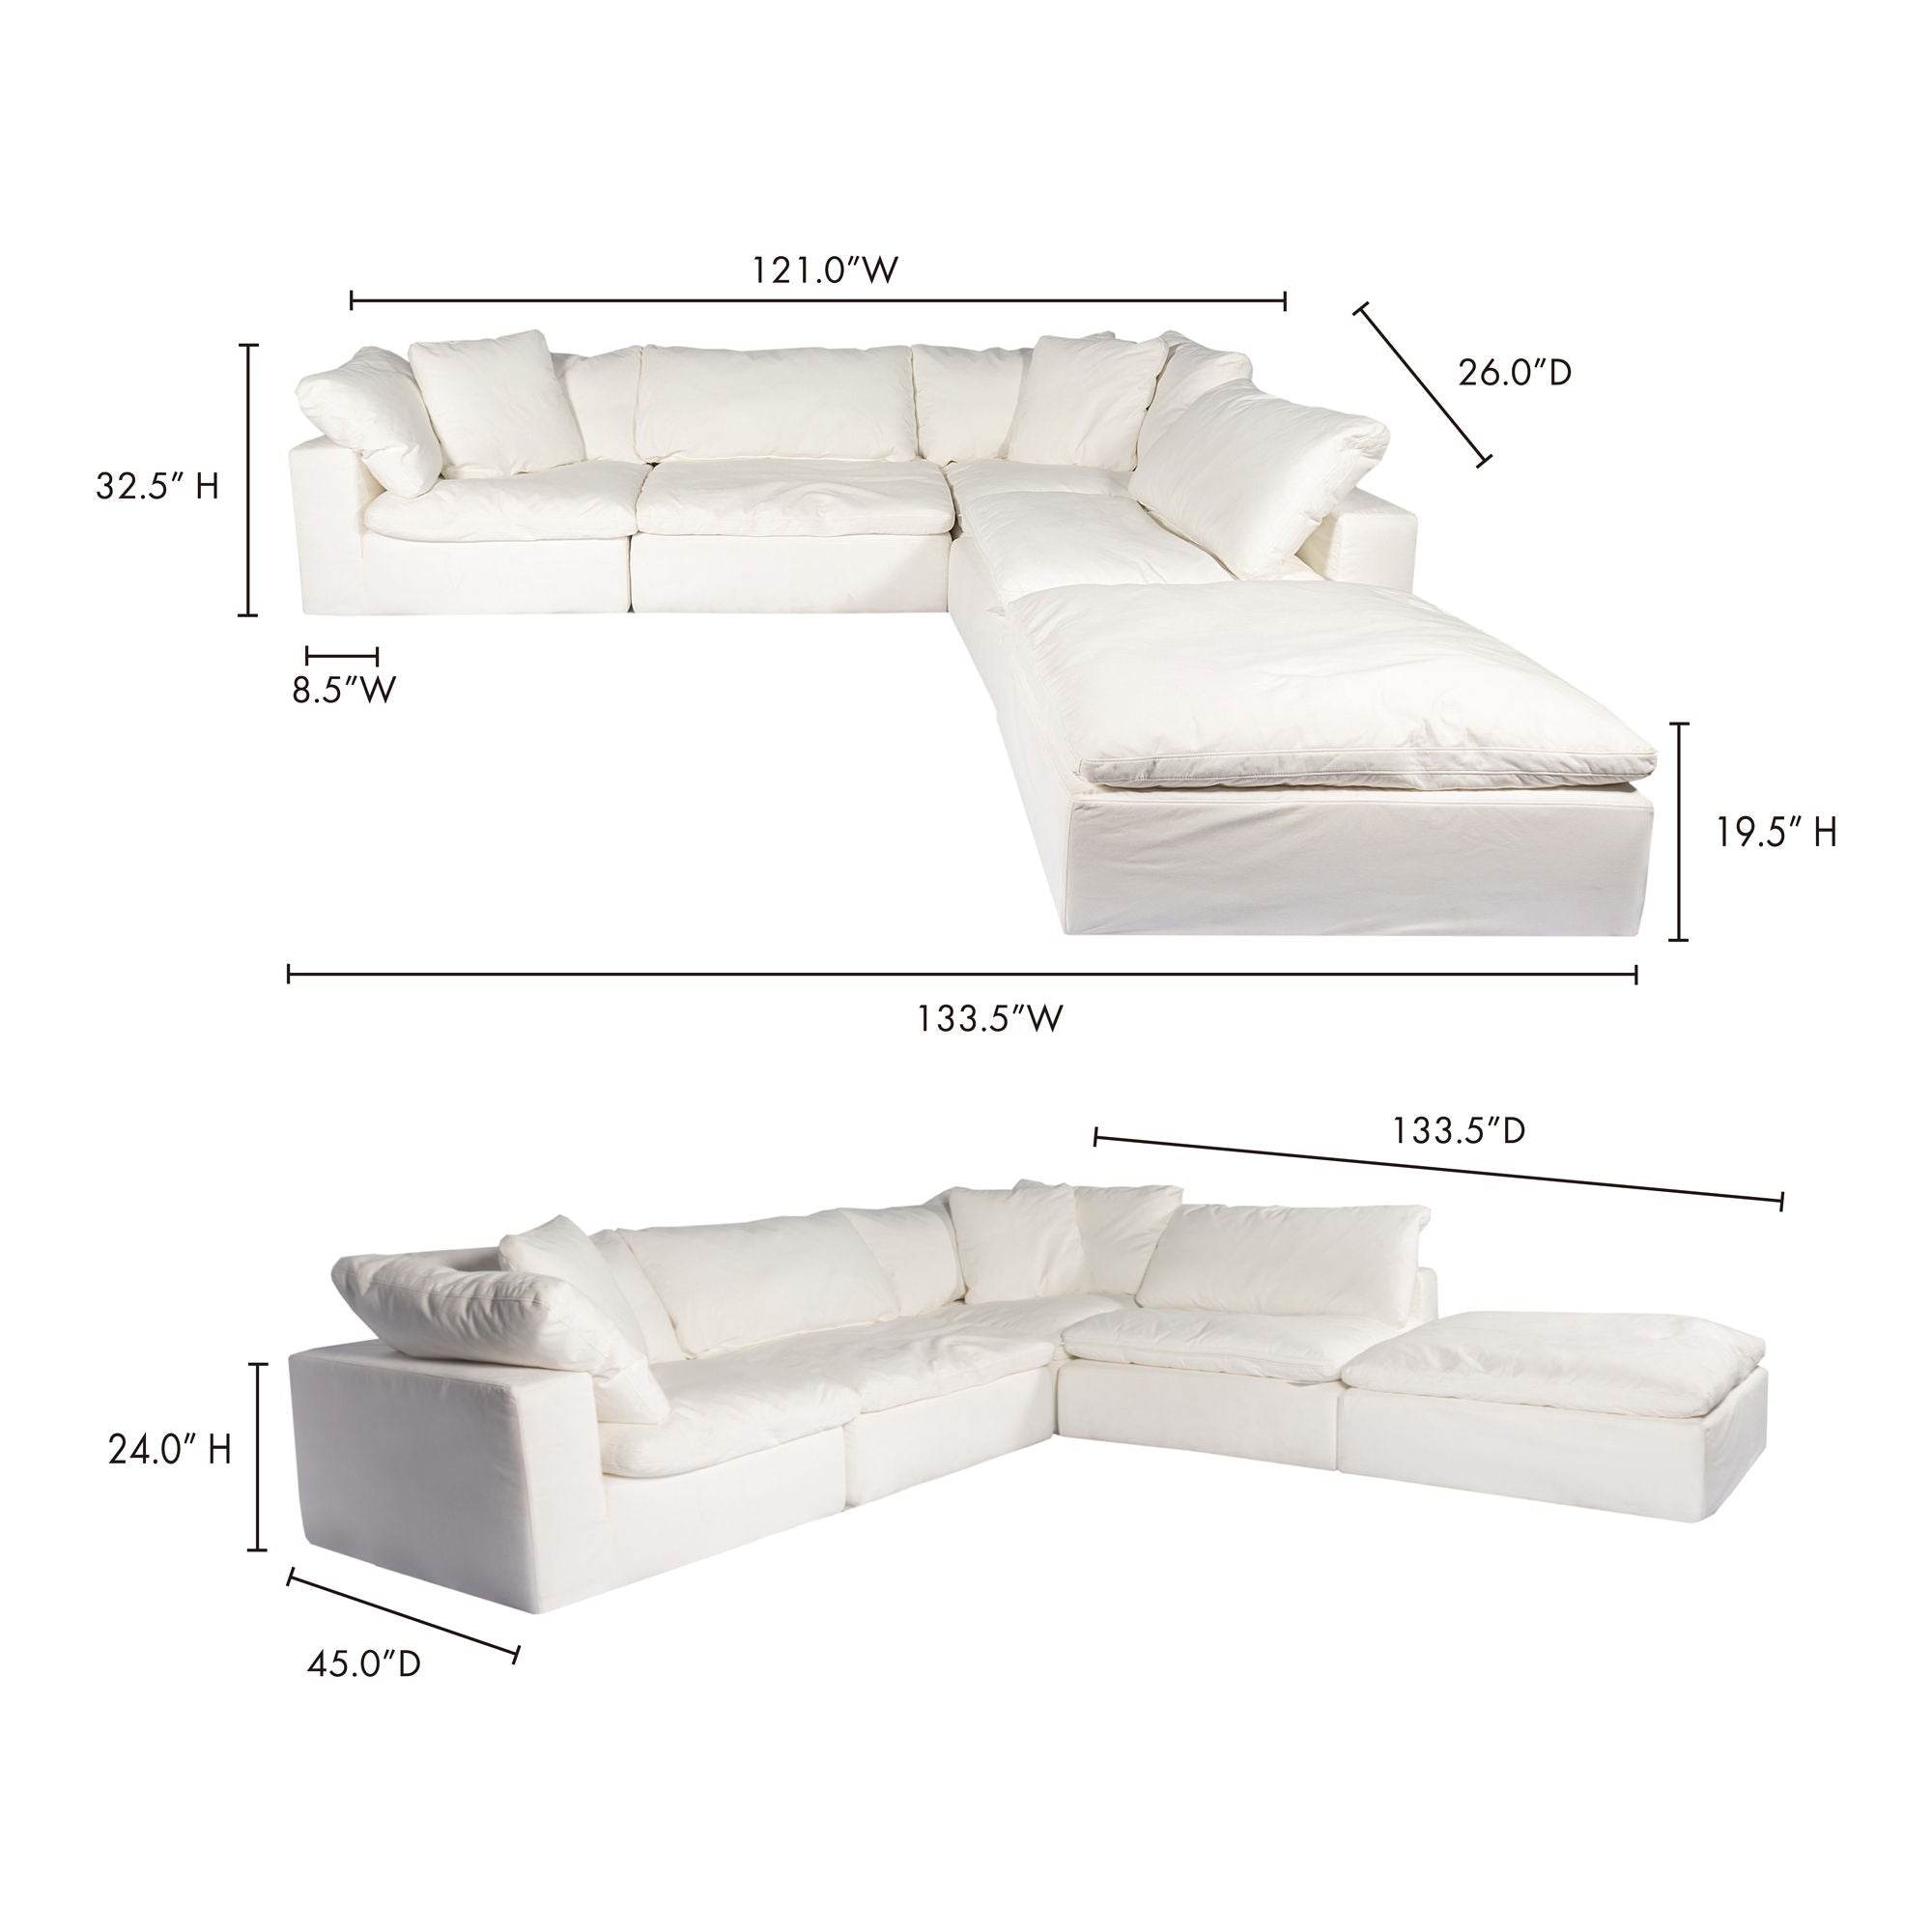 Clay - Dream Modular Sectional Livesmart Fabric - White Cream-Stationary Sectionals-American Furniture Outlet